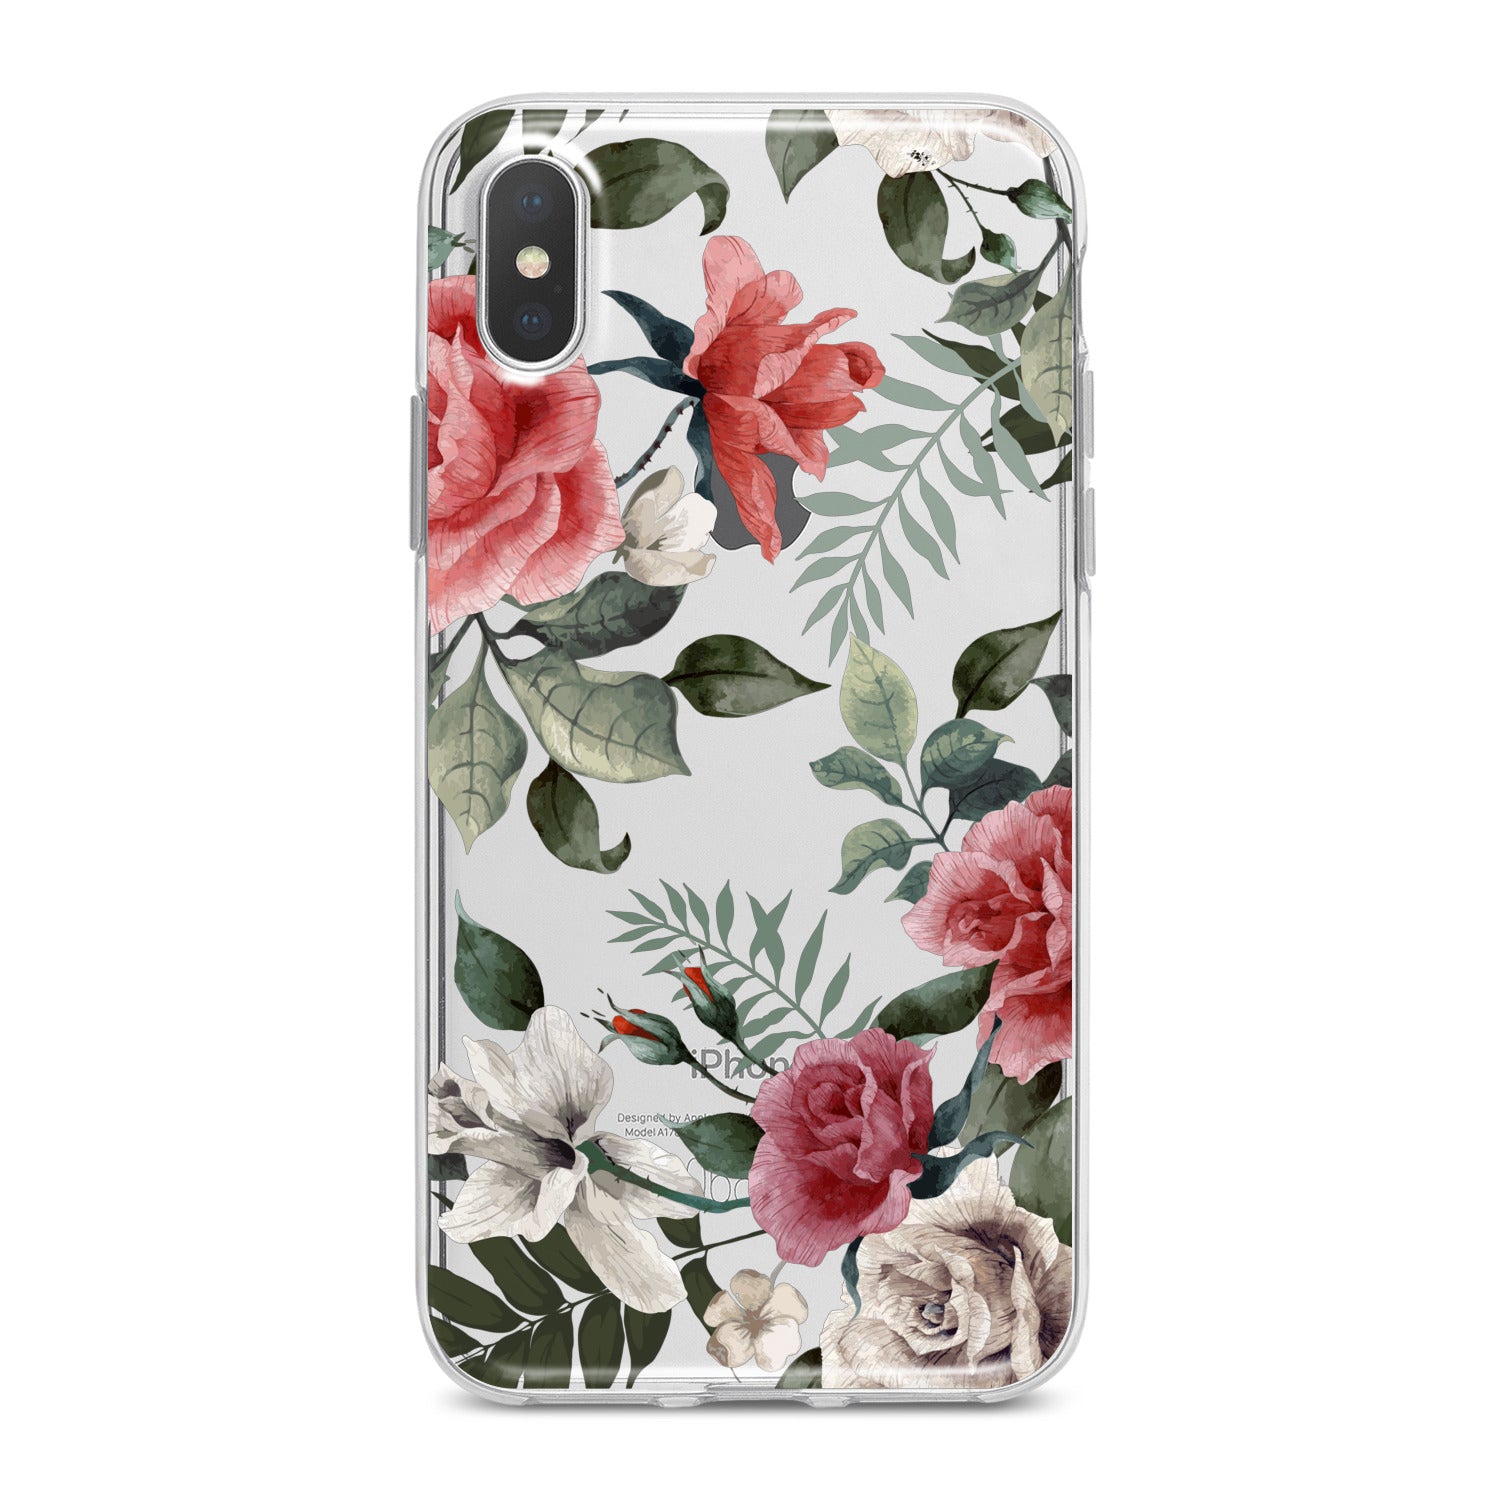 Lex Altern Vintage Roses Phone Case for your iPhone & Android phone.